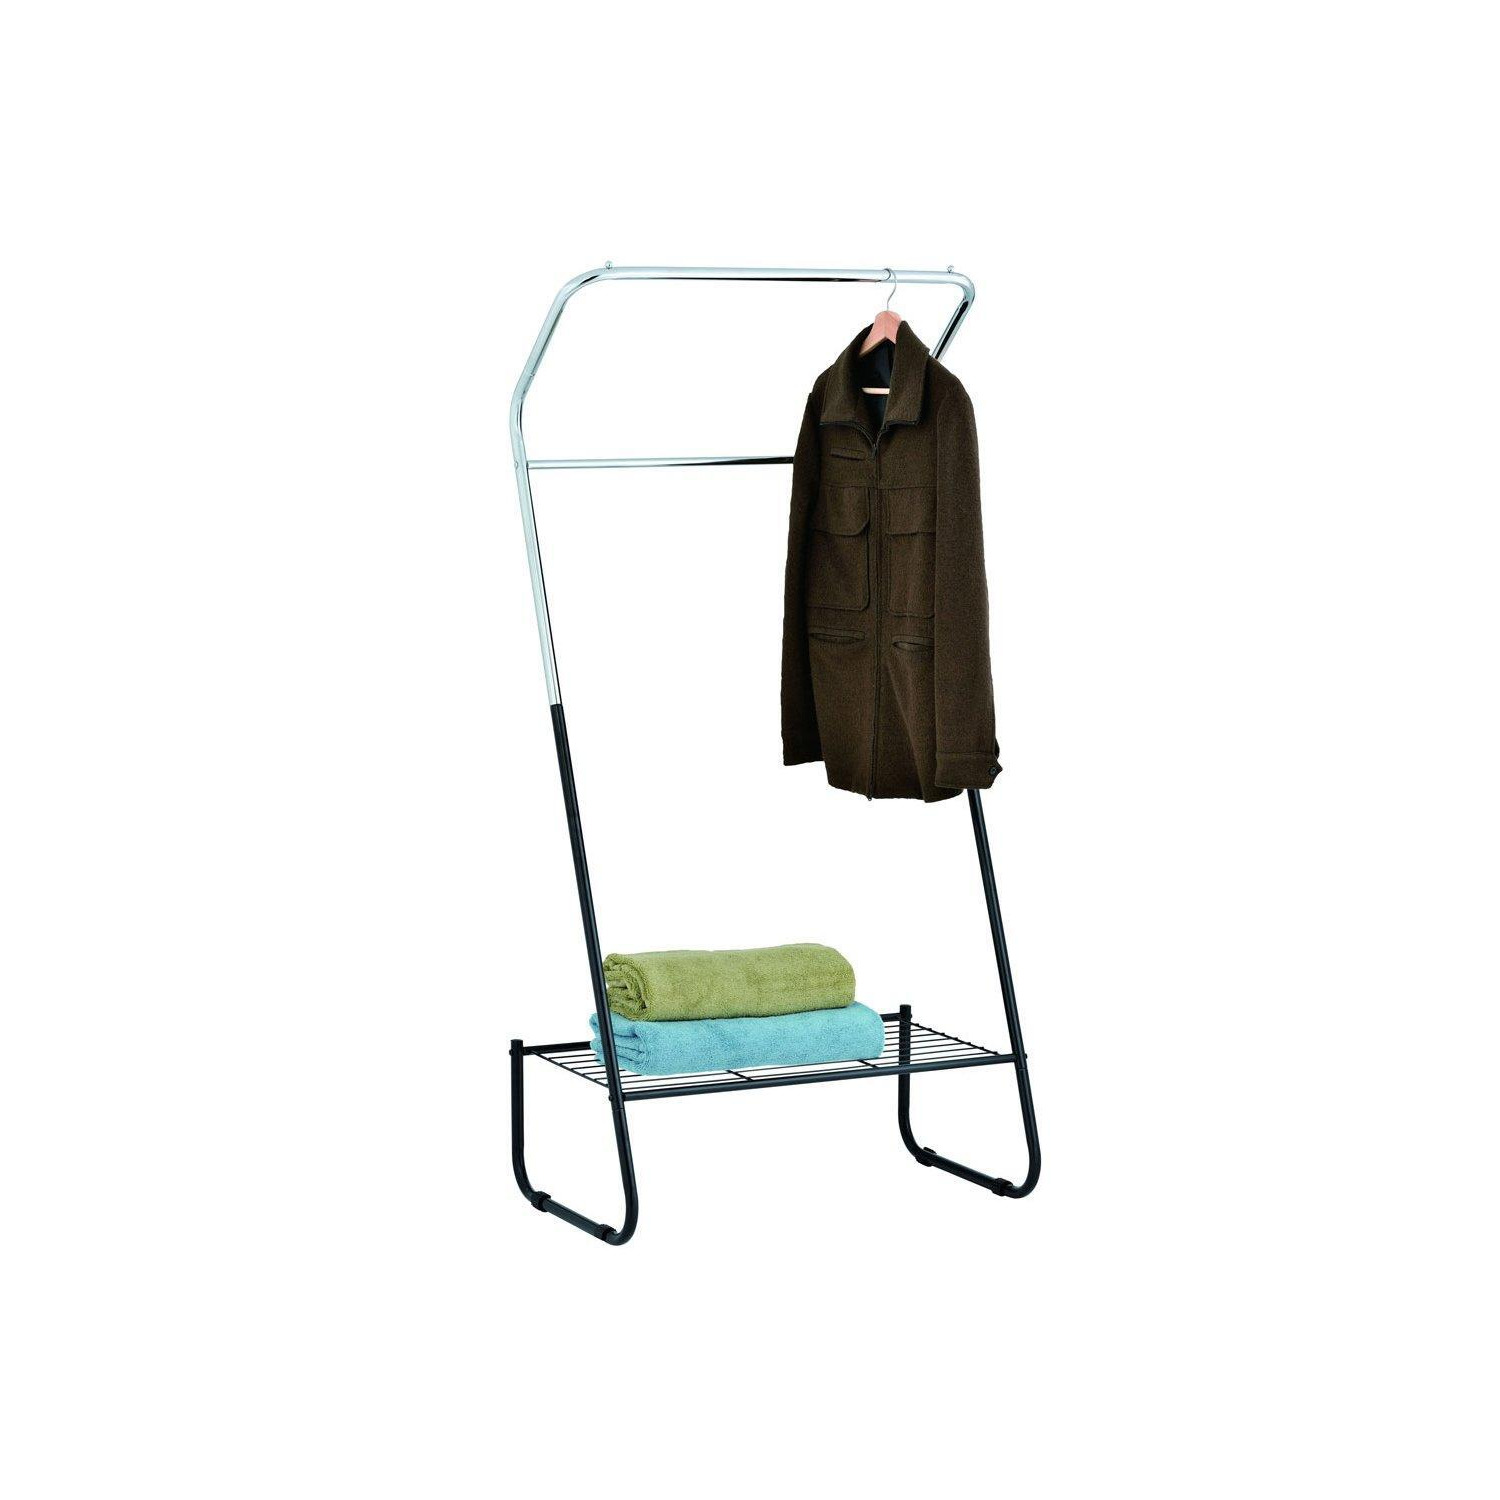 Metal Clothes Rail With Shelf - image 1